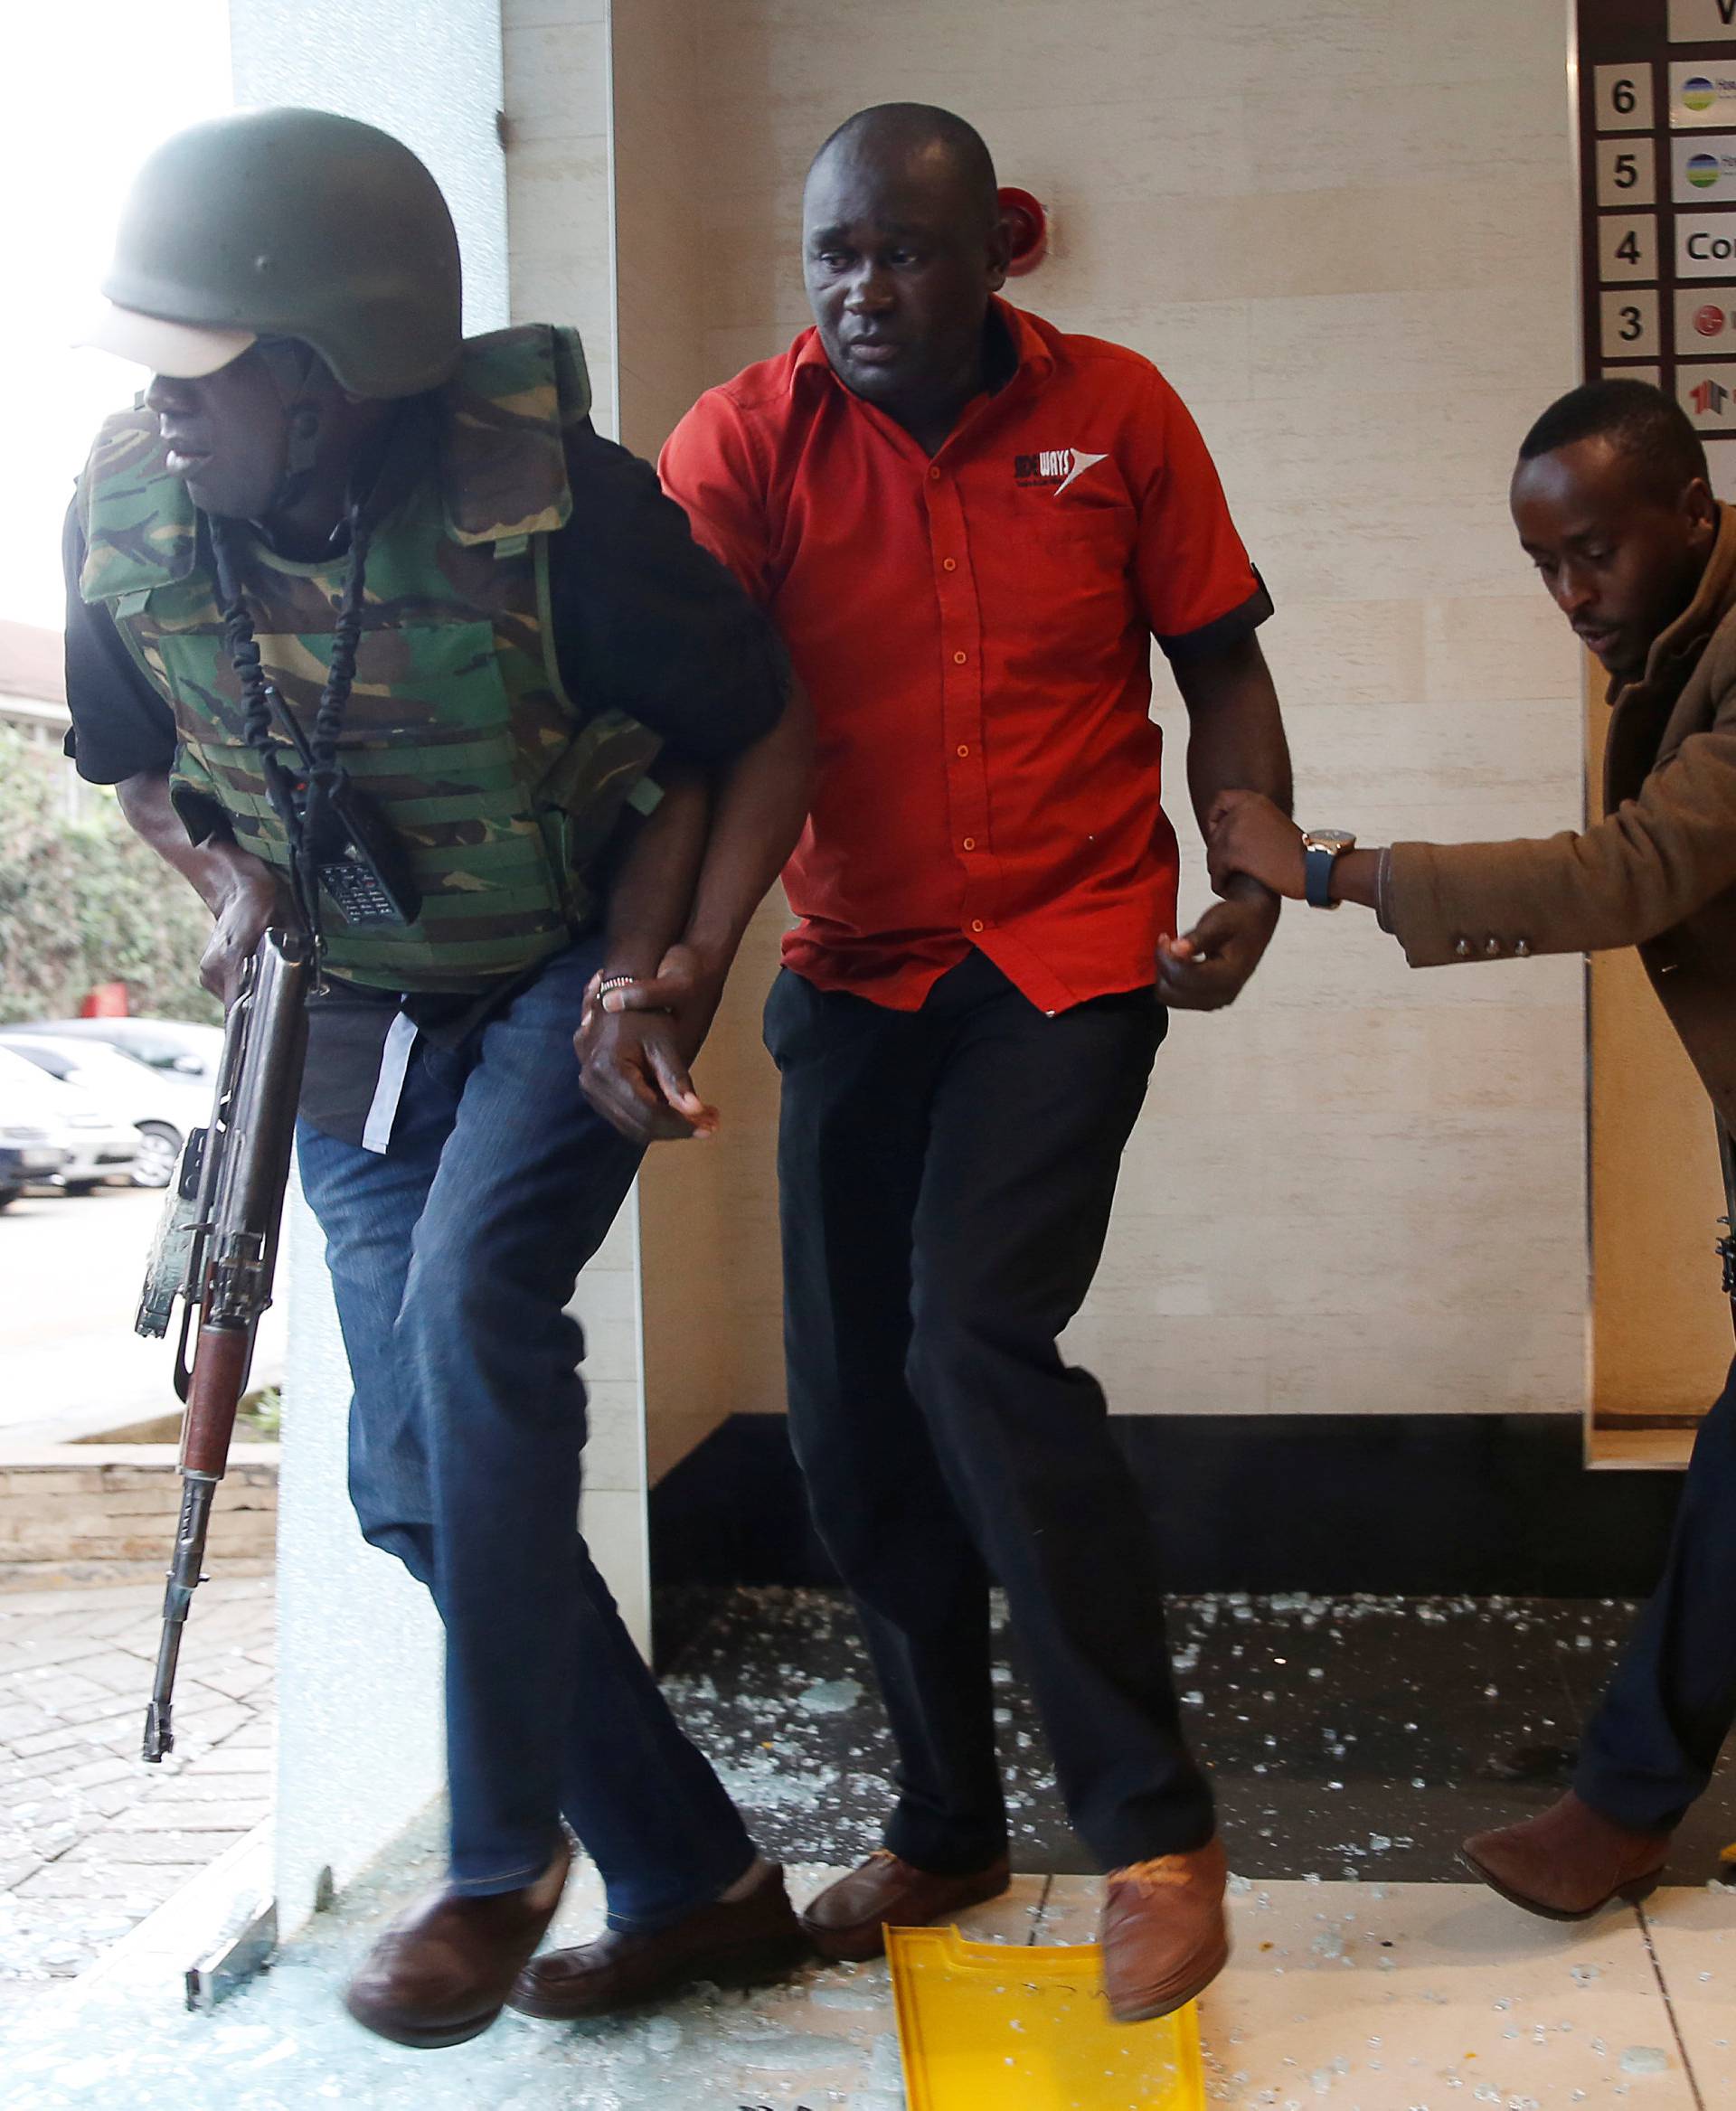 A man is evacuated by a member of security forces at the scene where explosions and gunshots were heard at the Dusit hotel compound, in Nairobi